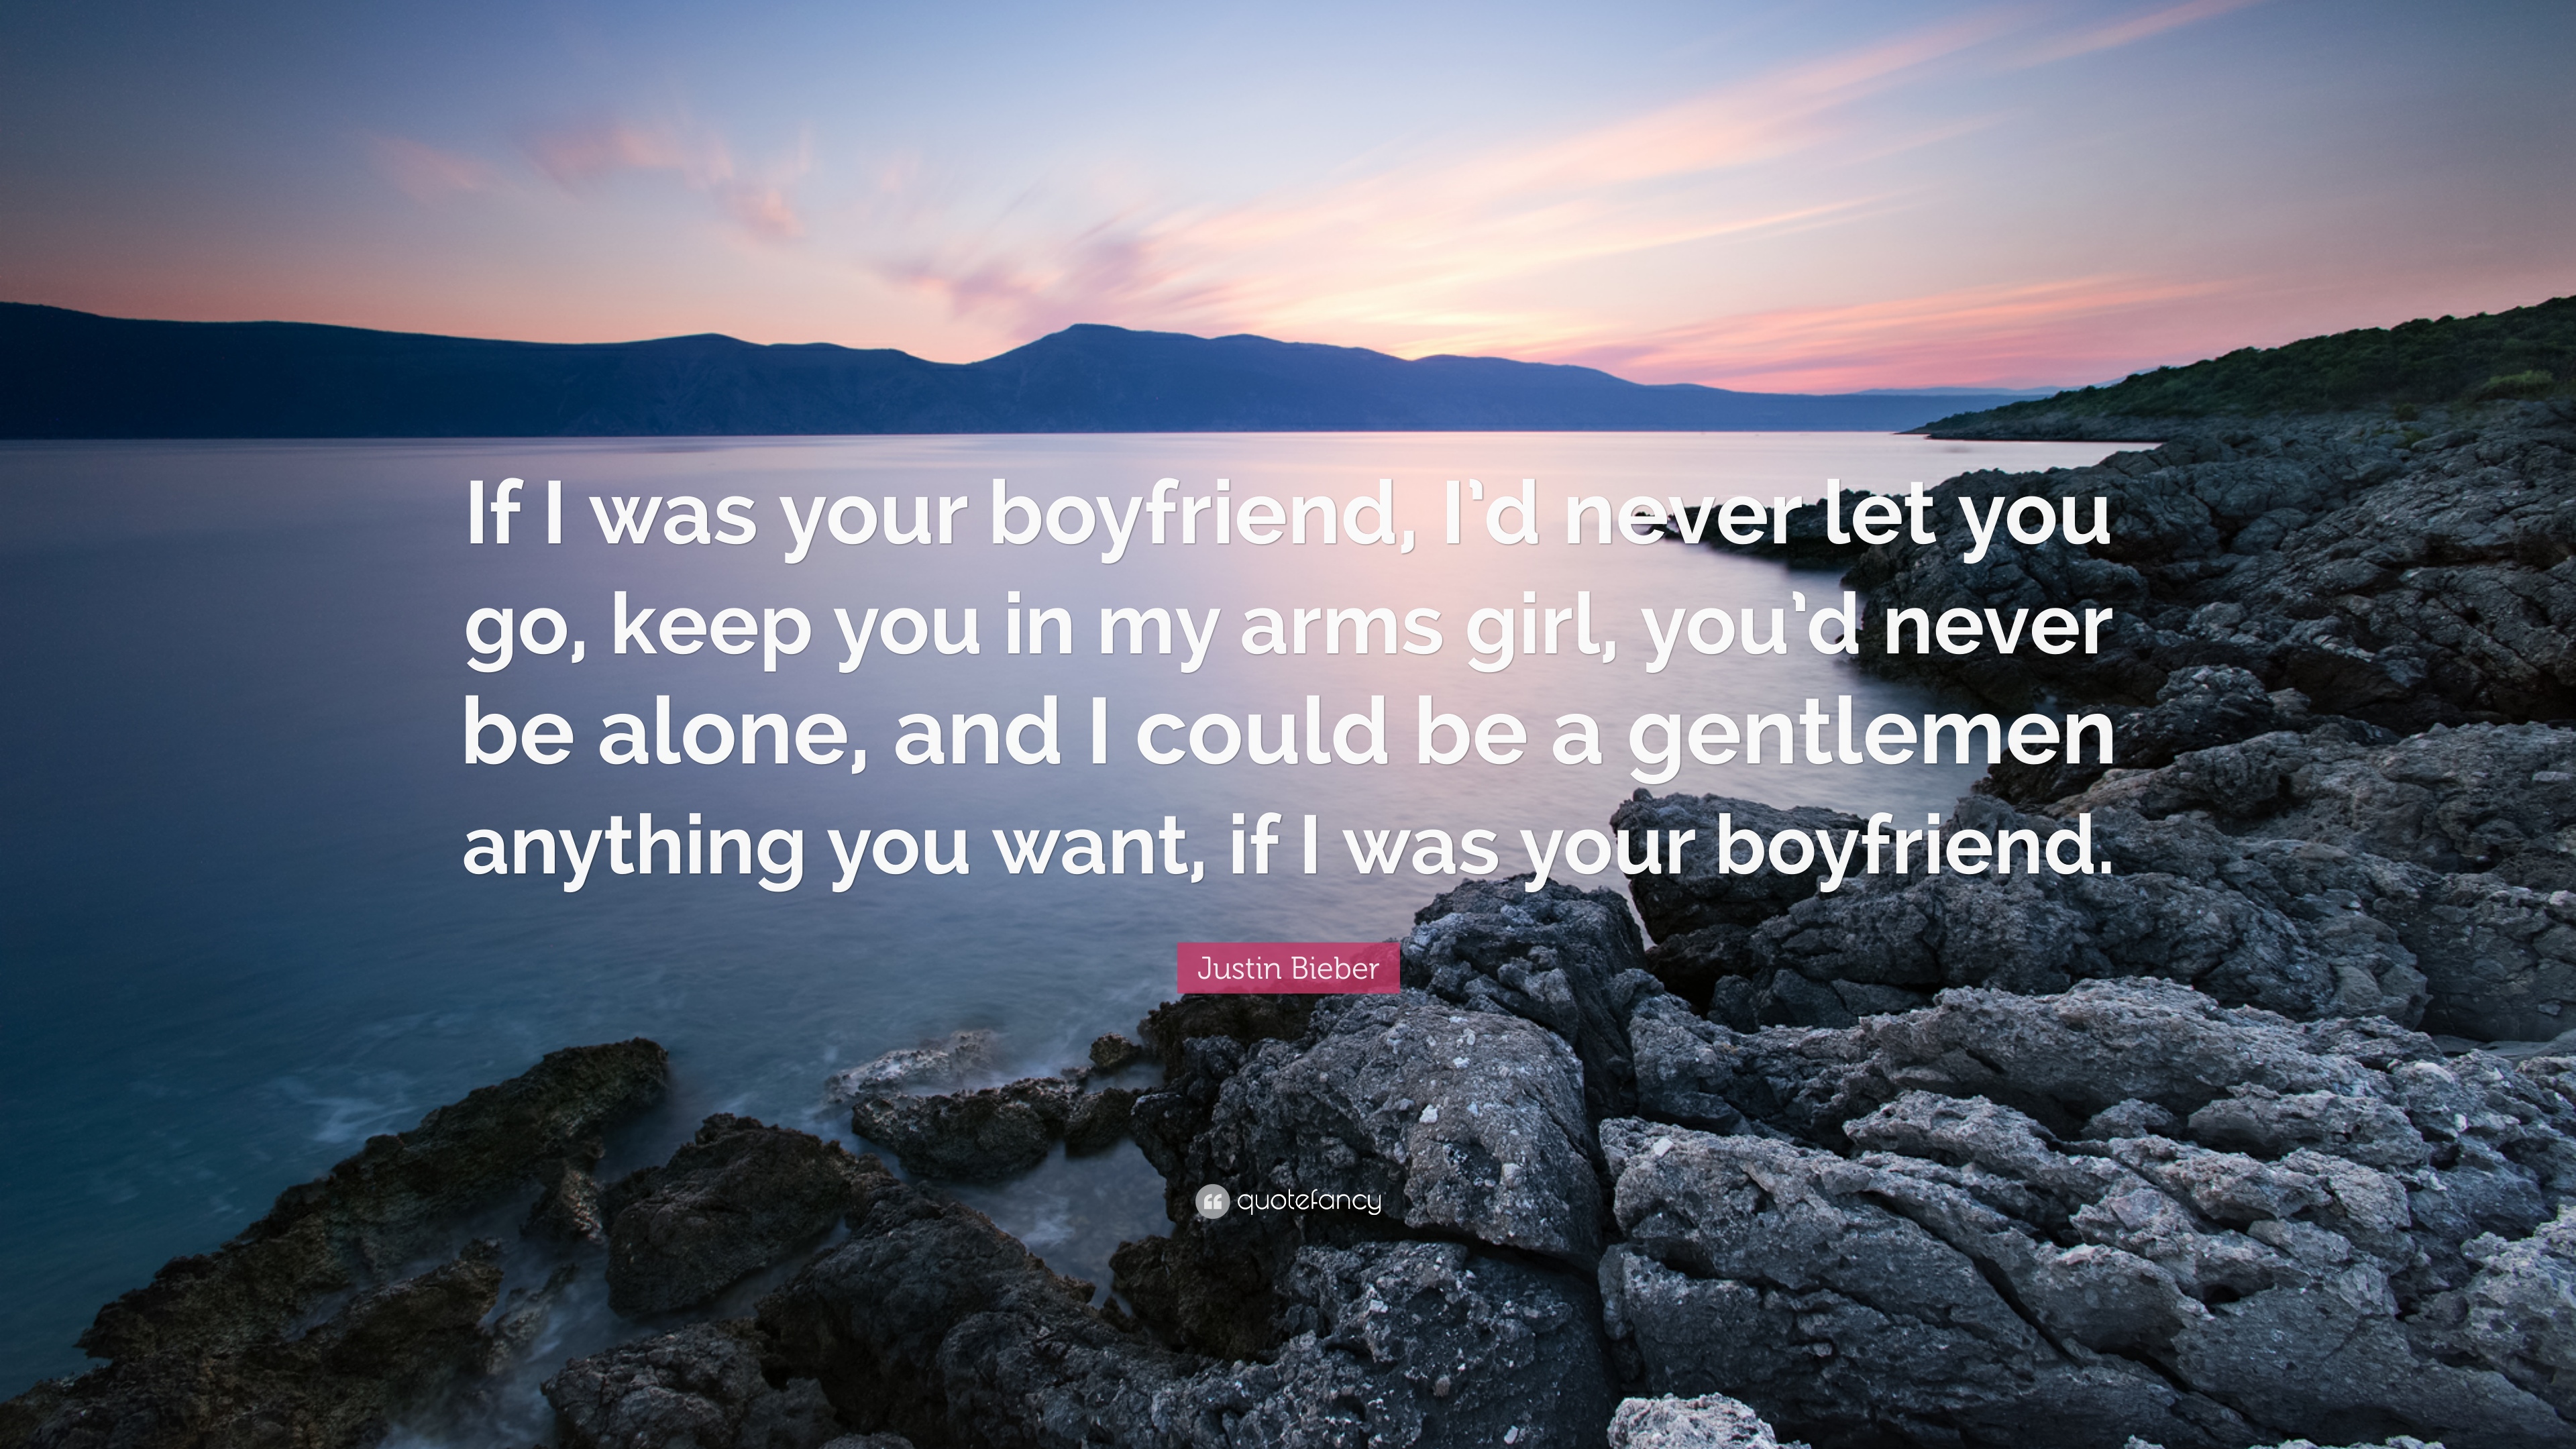 Justin Bieber Quote: “If I was your boyfriend, I'd never let